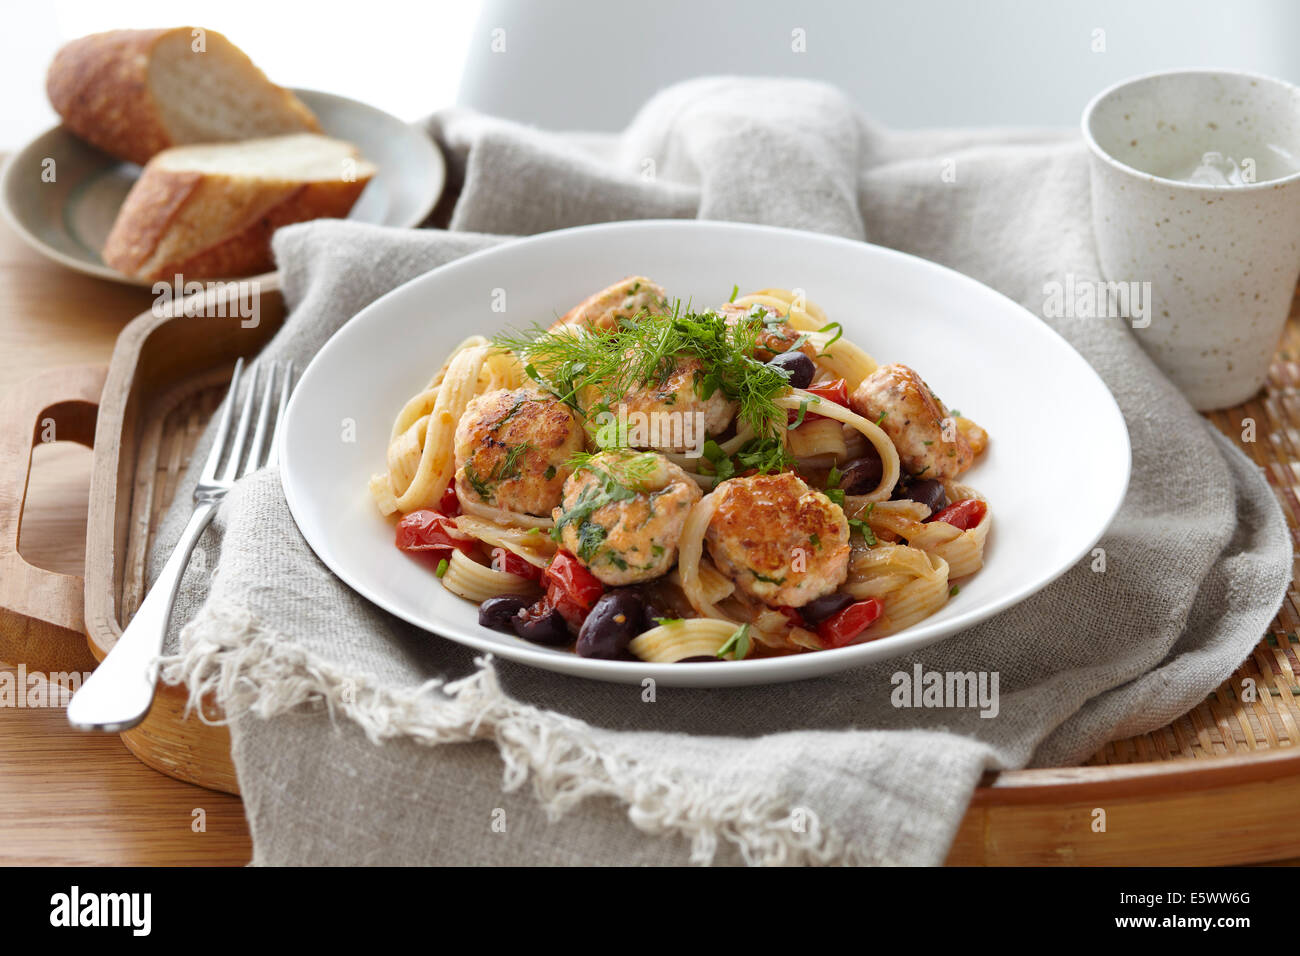 Bowl of linguine and salmon polpette with herb garnish Stock Photo